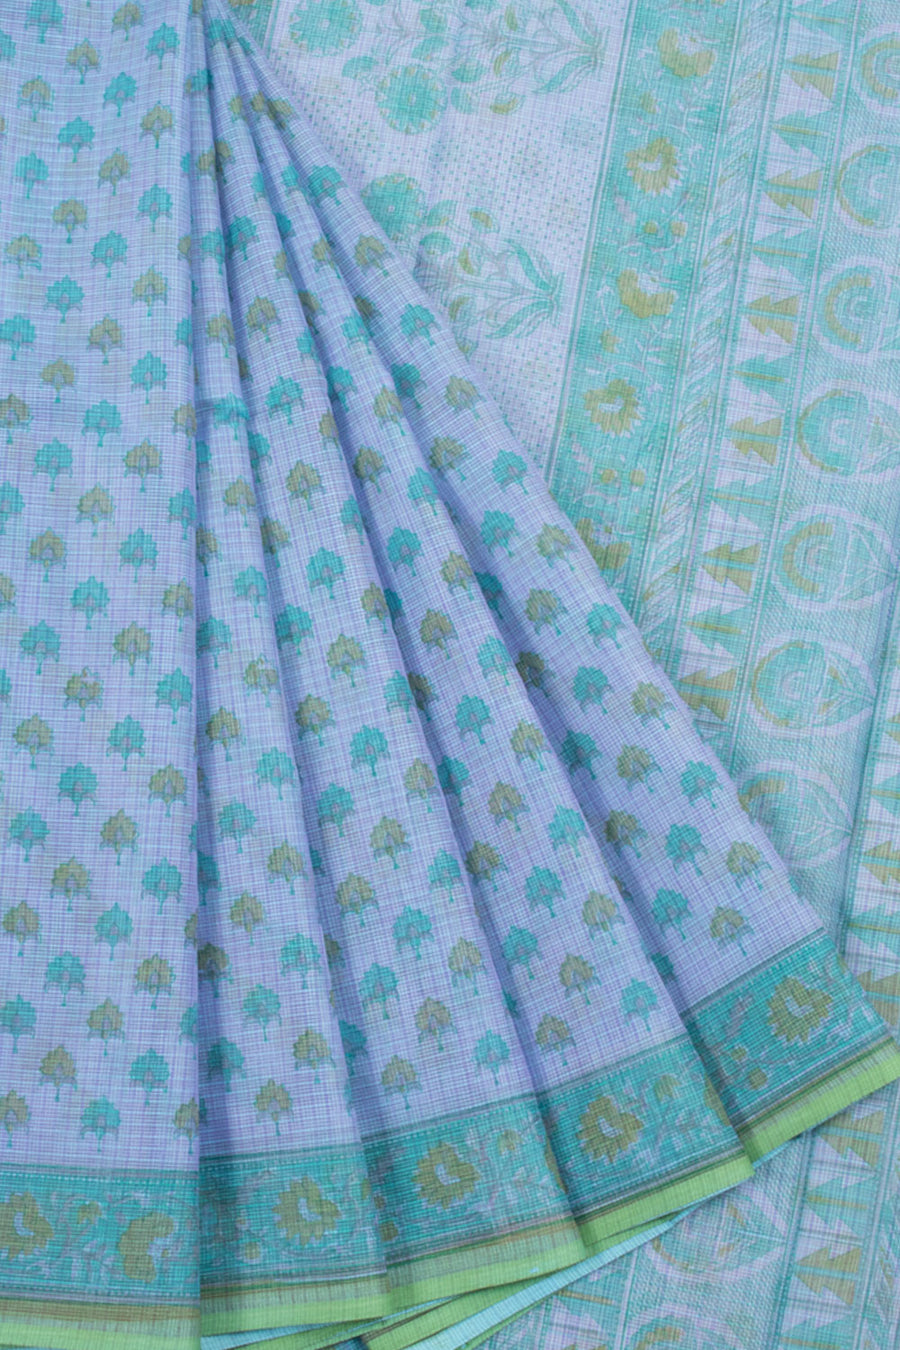 Bluish Violet Hand Block Printed Kota Cotton Saree with Floral Motifs, Floral Border and without Blouse